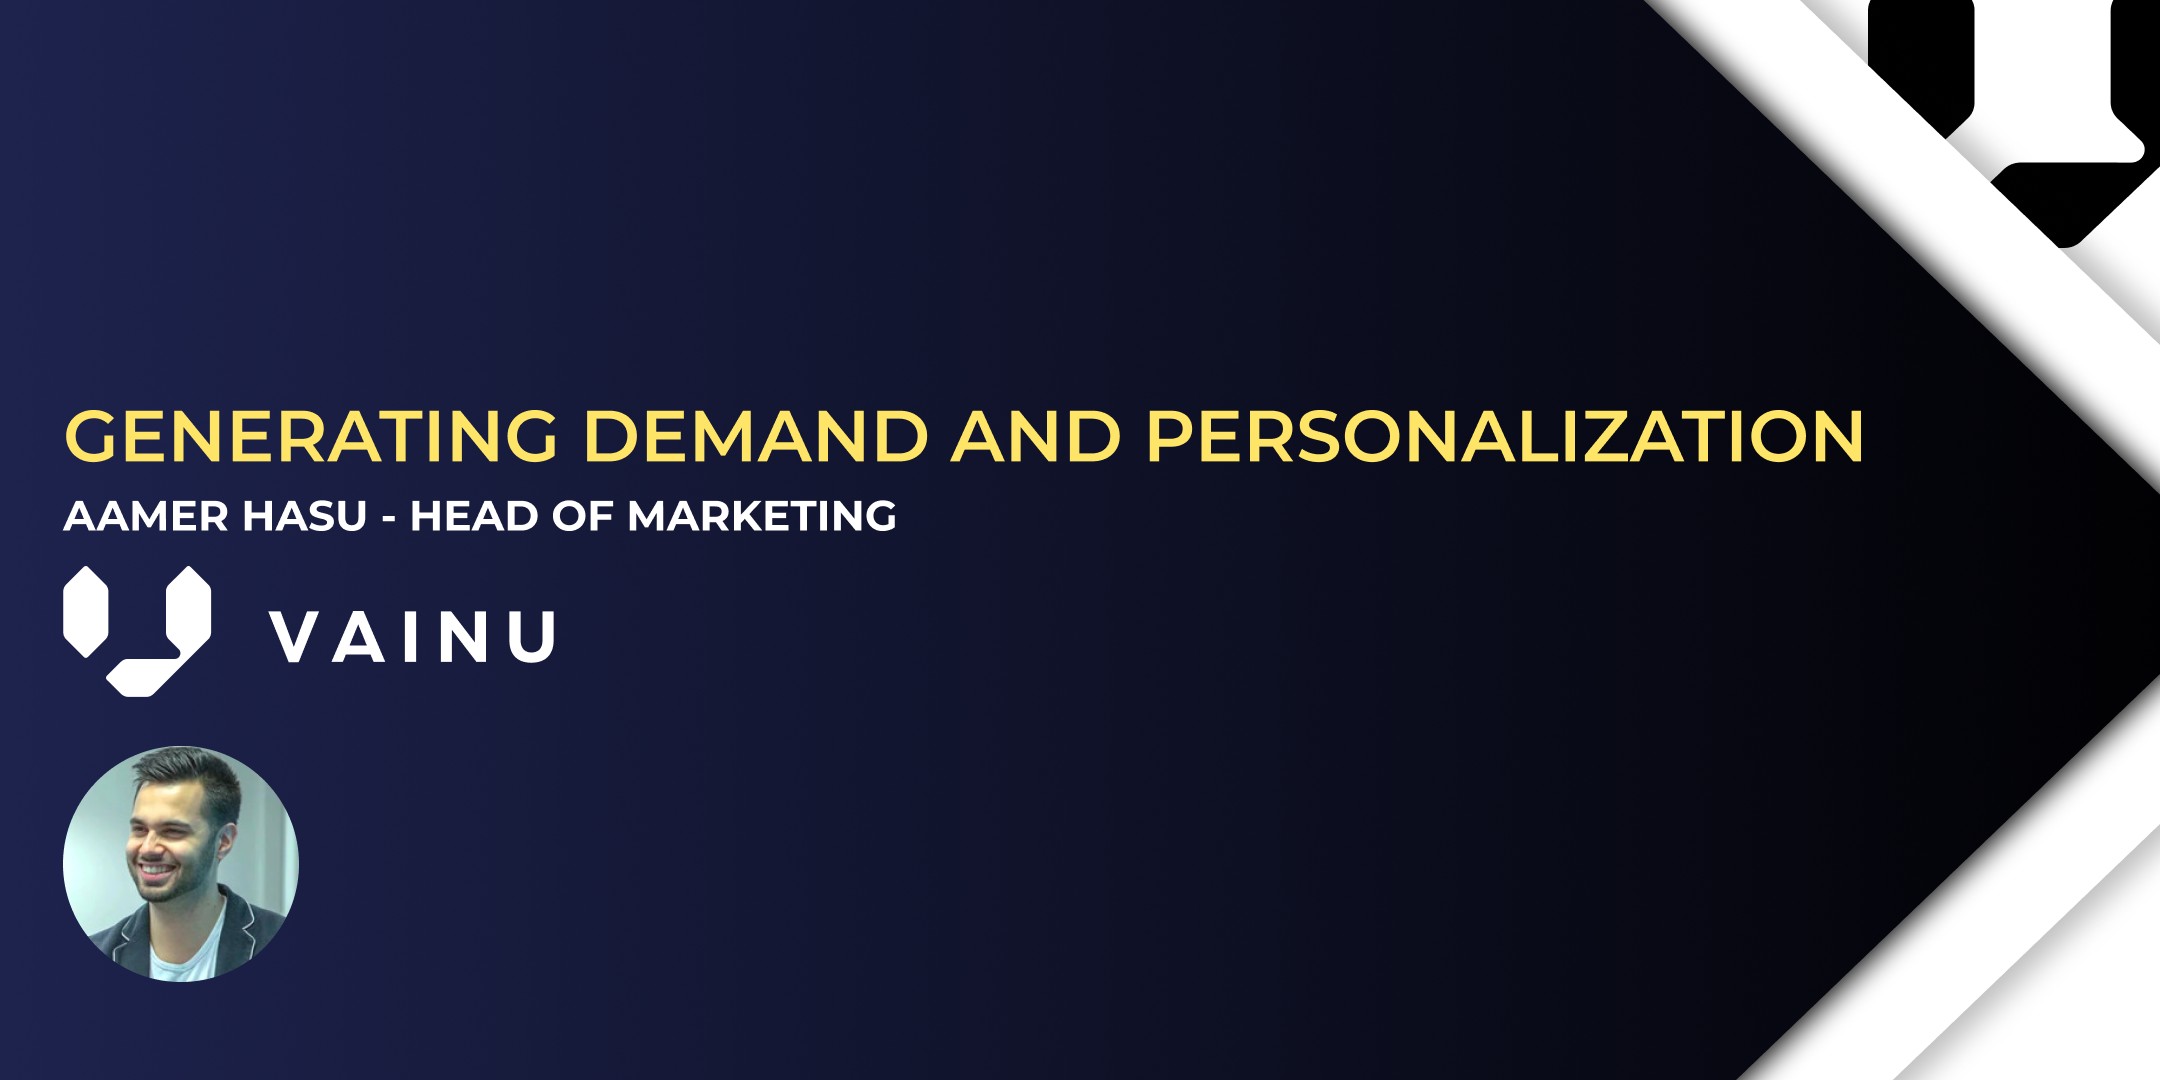 Demand generation and personalization with Aamer Hasu